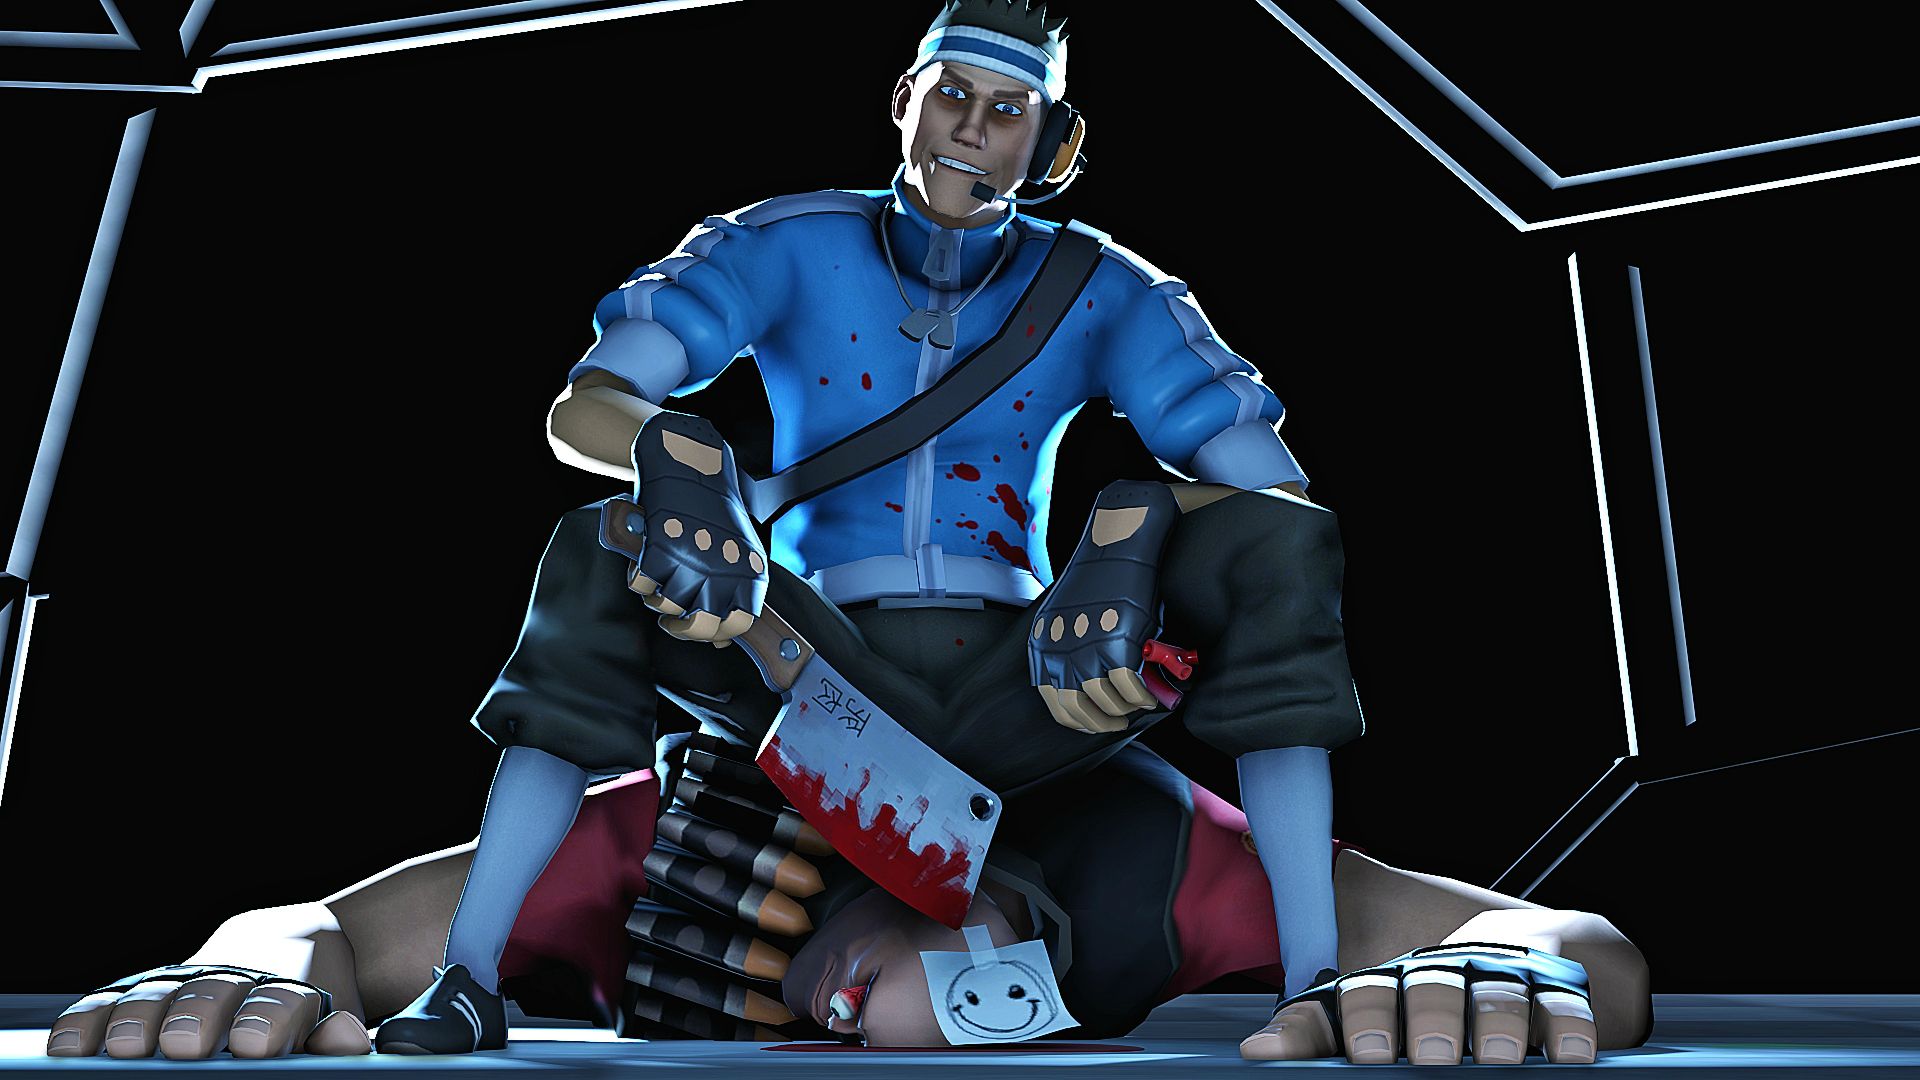 99 TF2 Wallpapers made in SFM - Album on Imgur